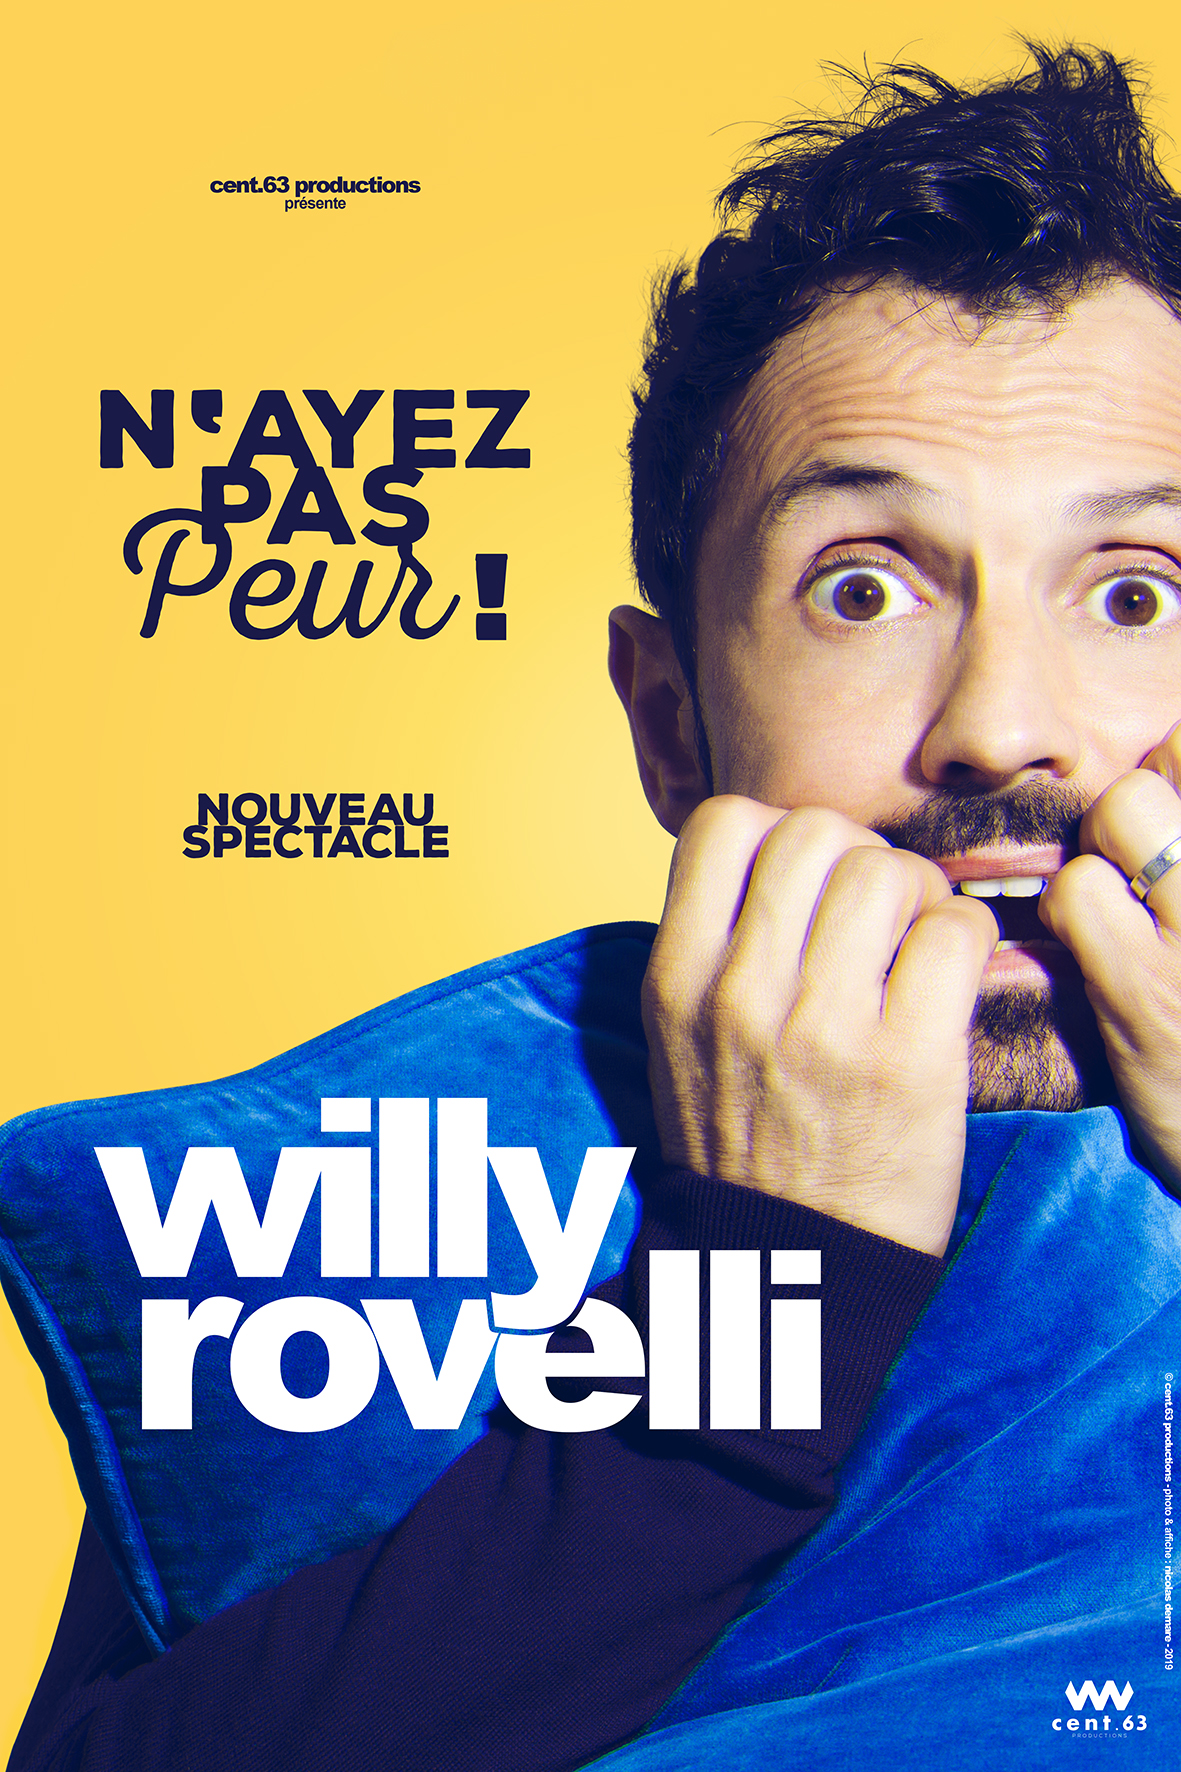 22 - 20 02 07 willy rovelli